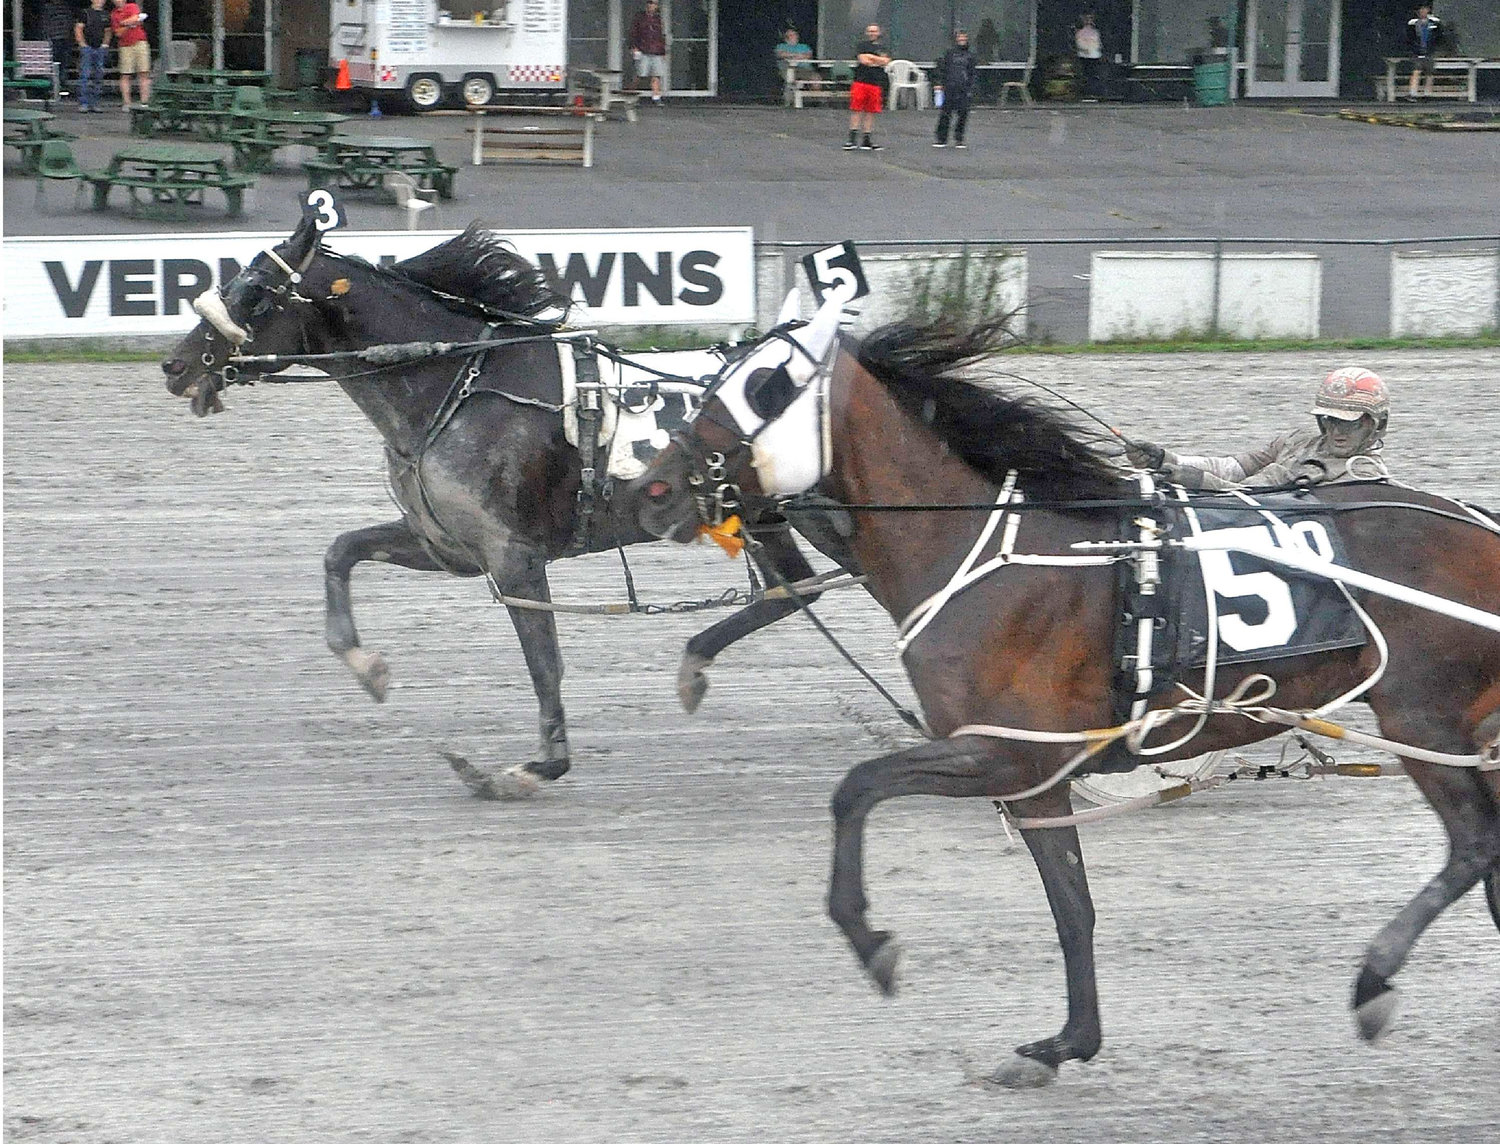 Natameri charged to a late victory in the $9,200 Open 1 Pace Monday at Vernon Downs. The win with driver John MacDonald was in 1:54.1. It was the horse’s sixth win of 2022.